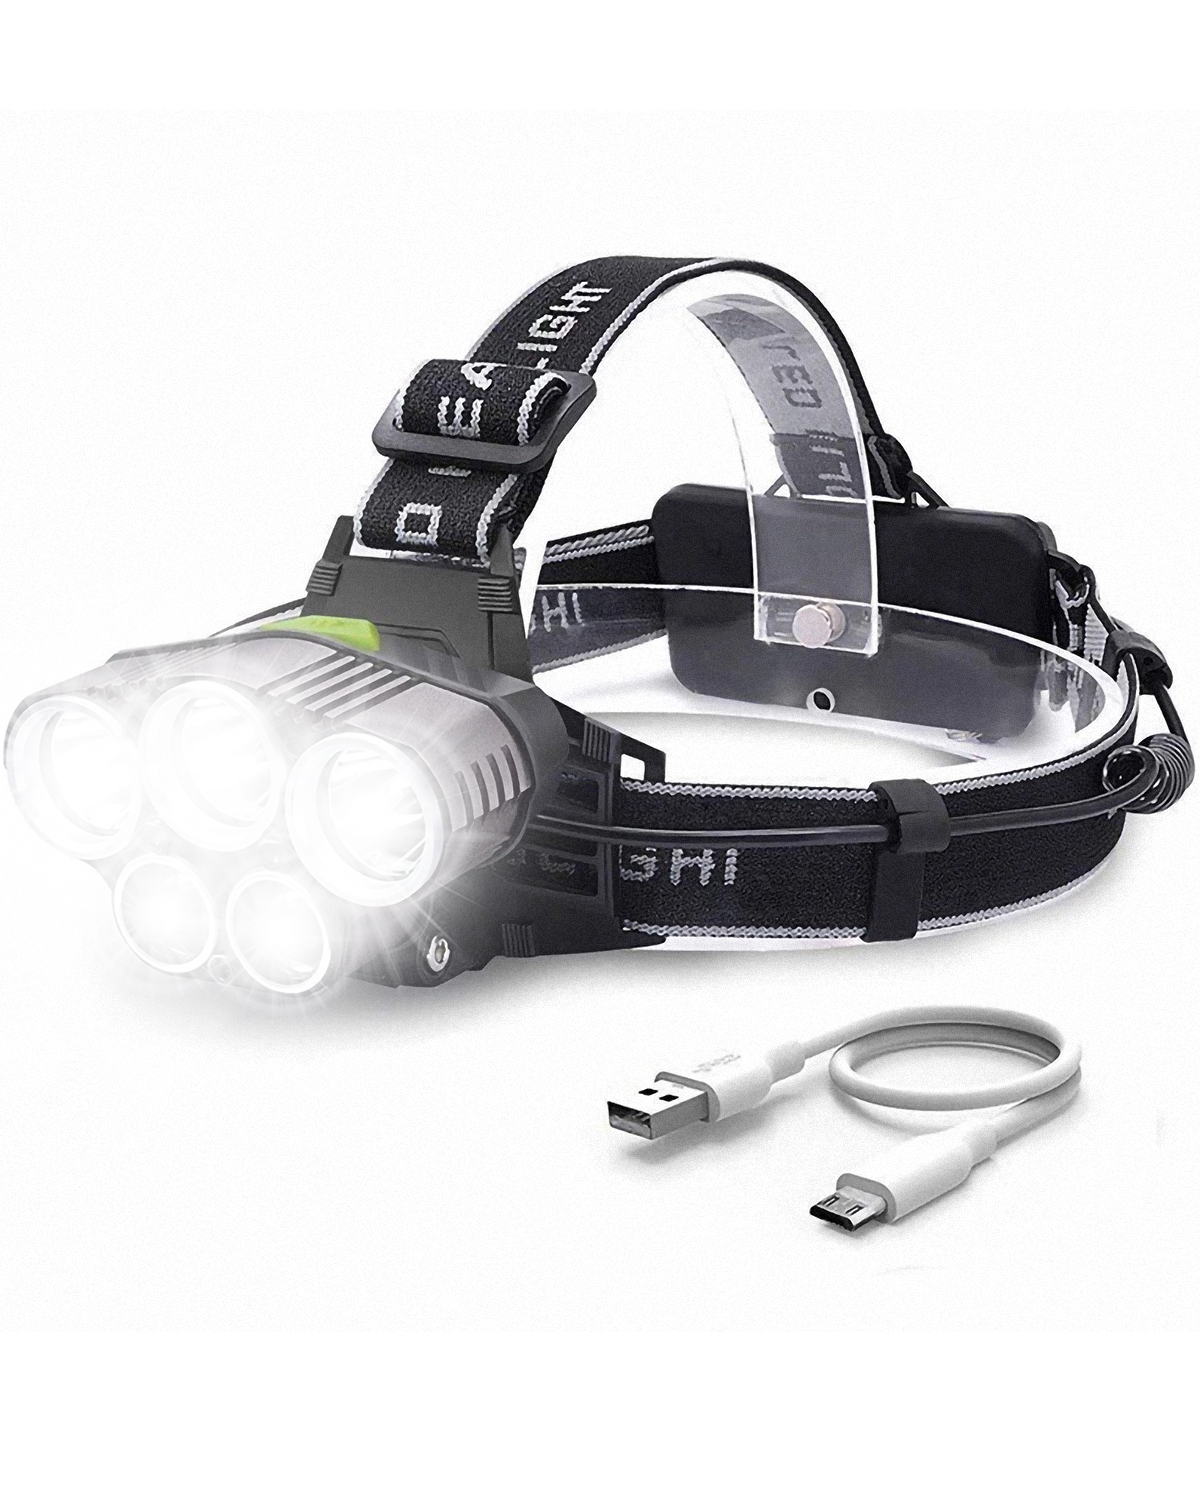 Details about   USB Rechargeable Powerful 350000LM 5X LED Headlamp Headlight Torch Camping USA 